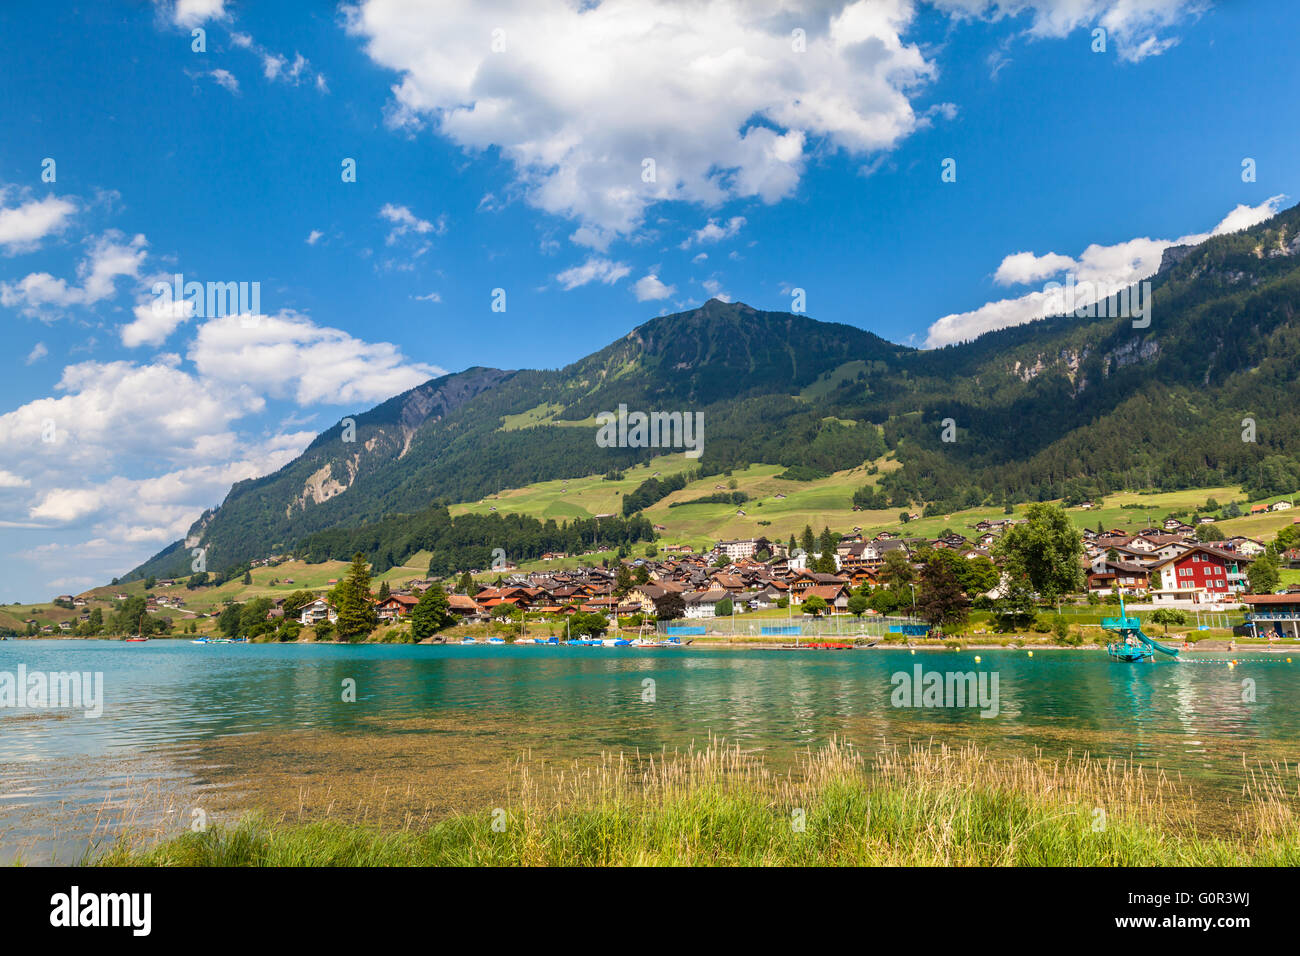 Stunning view of the small town Lungern on the lake side of Lungernsee on Bernese Oberland of Switzerland. This town lies on the Stock Photo